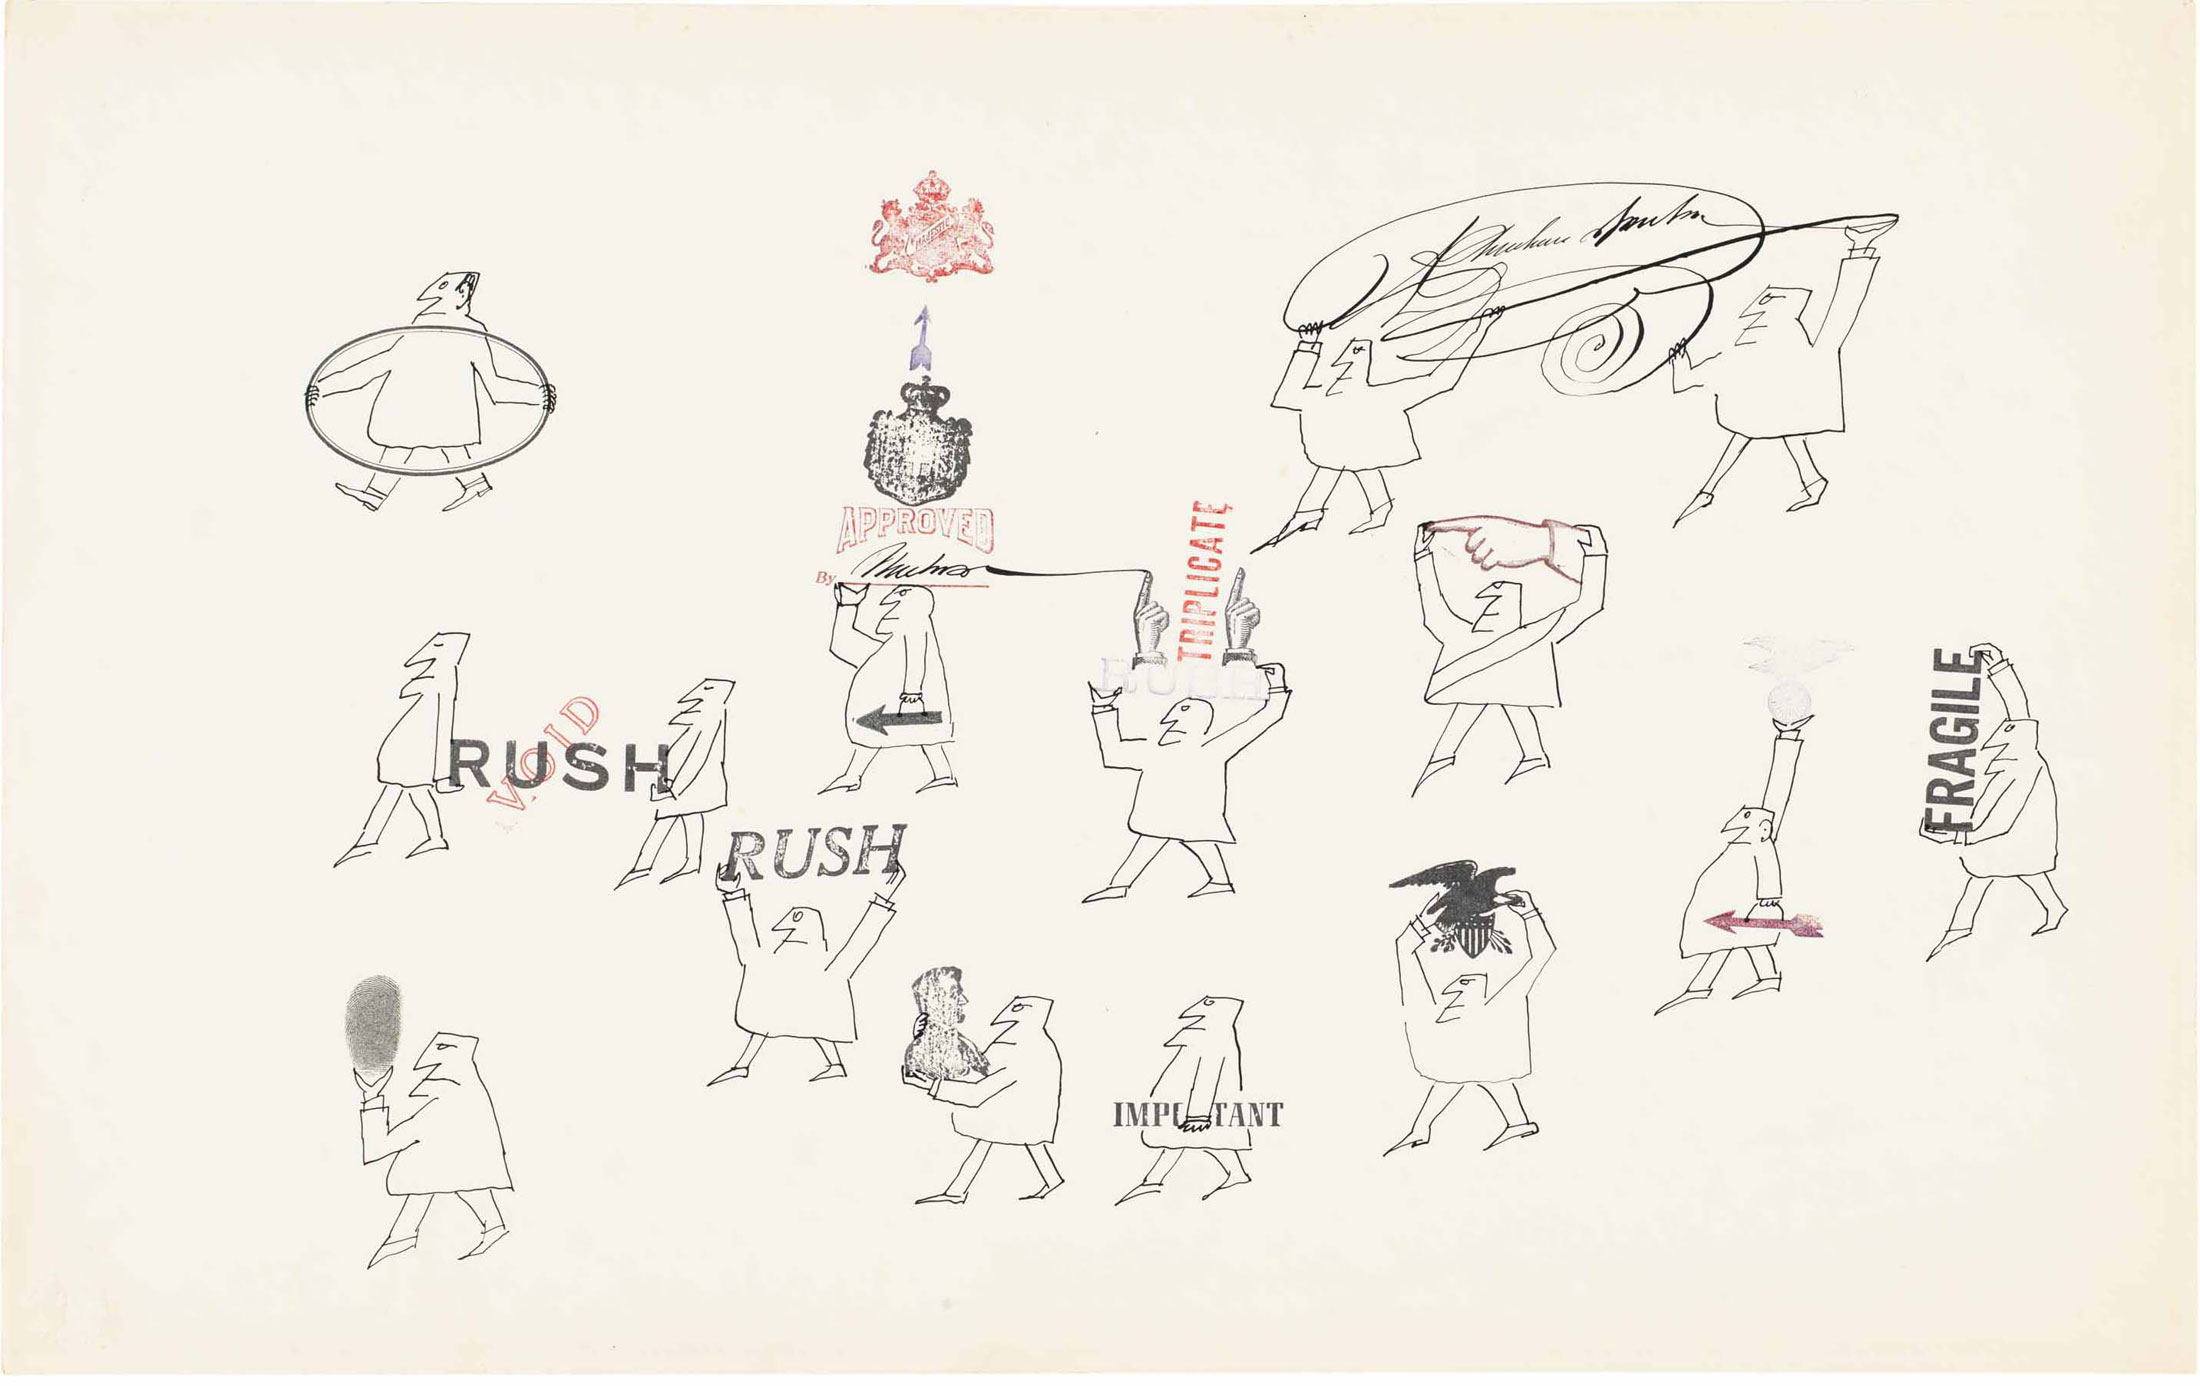 <em>Parade 2</em>, c. 1950-51. Ink, fingerprint, and rubber stamps on paper, 23 x 14 in. National Gallery of Art, Washington, DC; Gift of The Saul Steinberg Foundation.